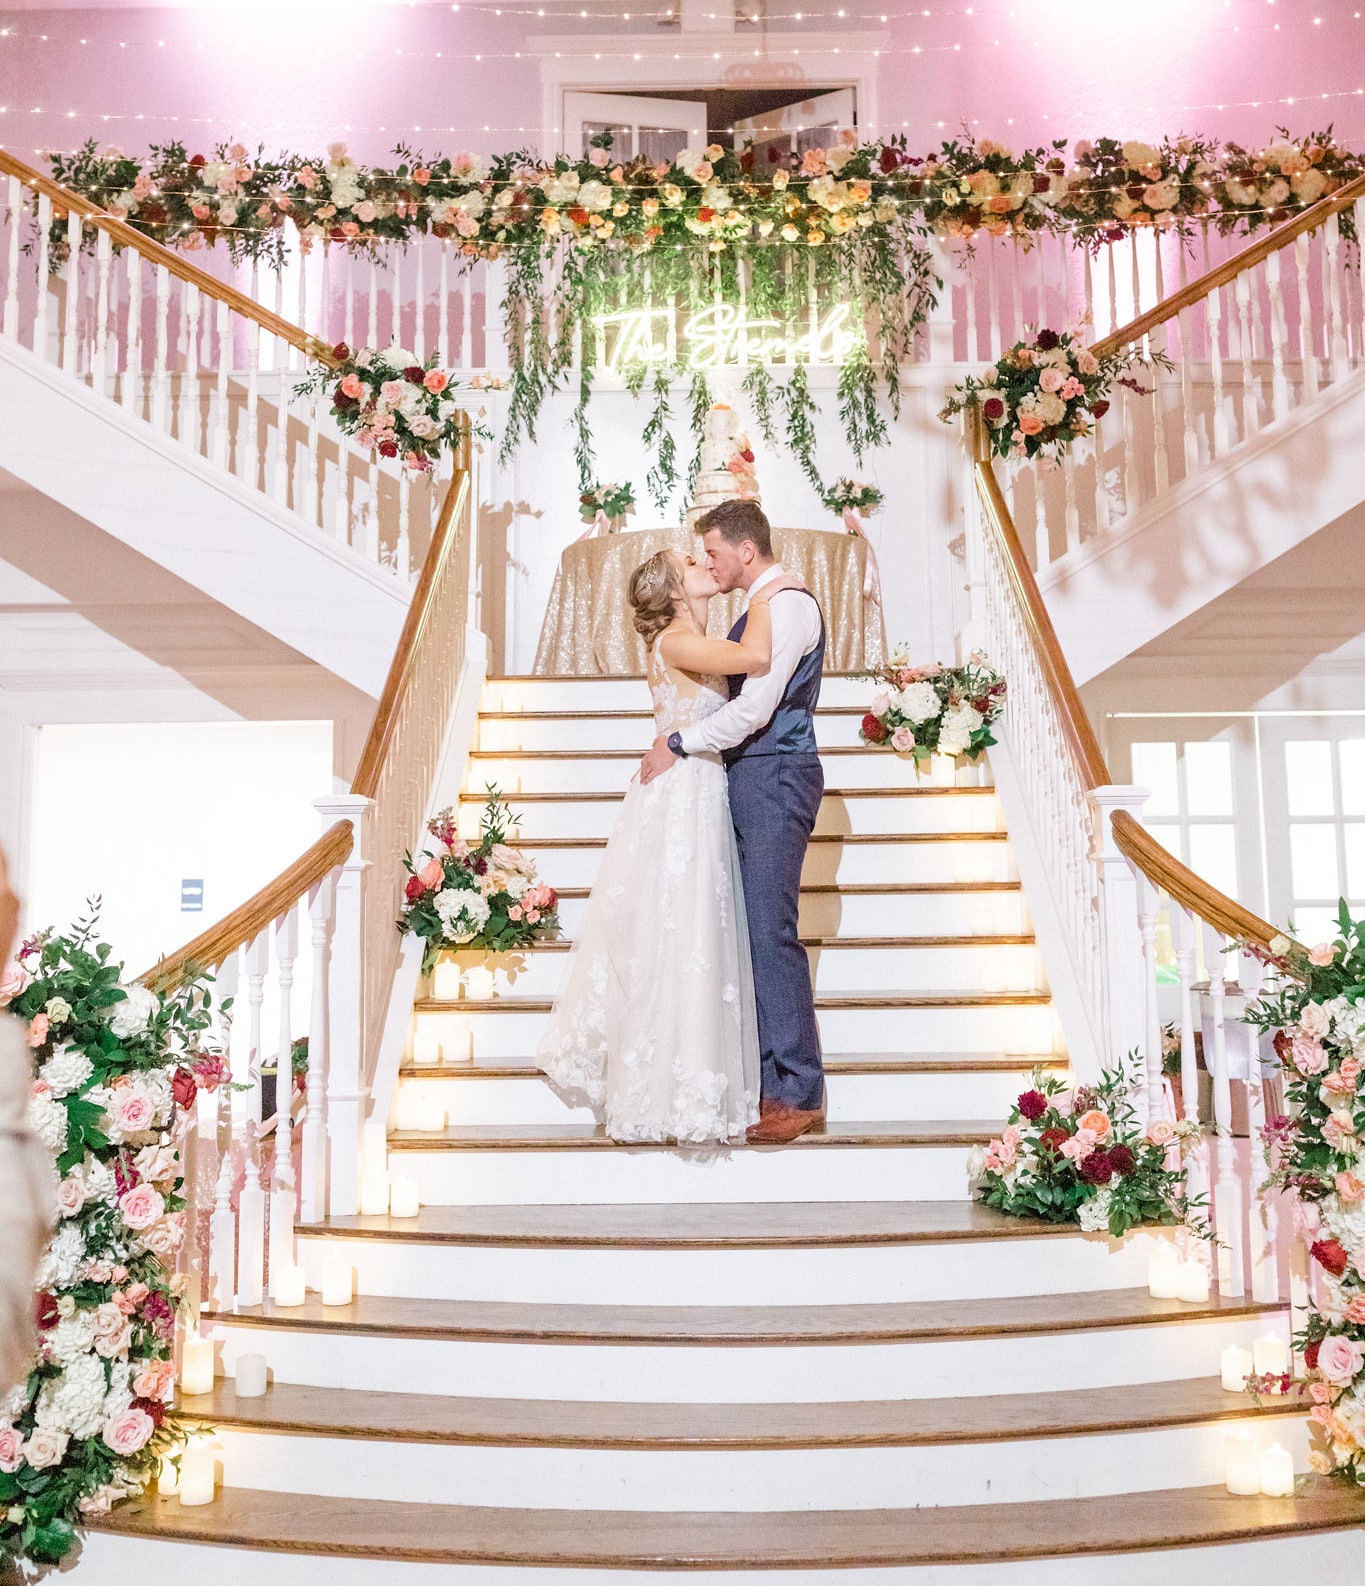 Kendall Point's grand staircase is an ideal location for an indoor wedding ceremony.